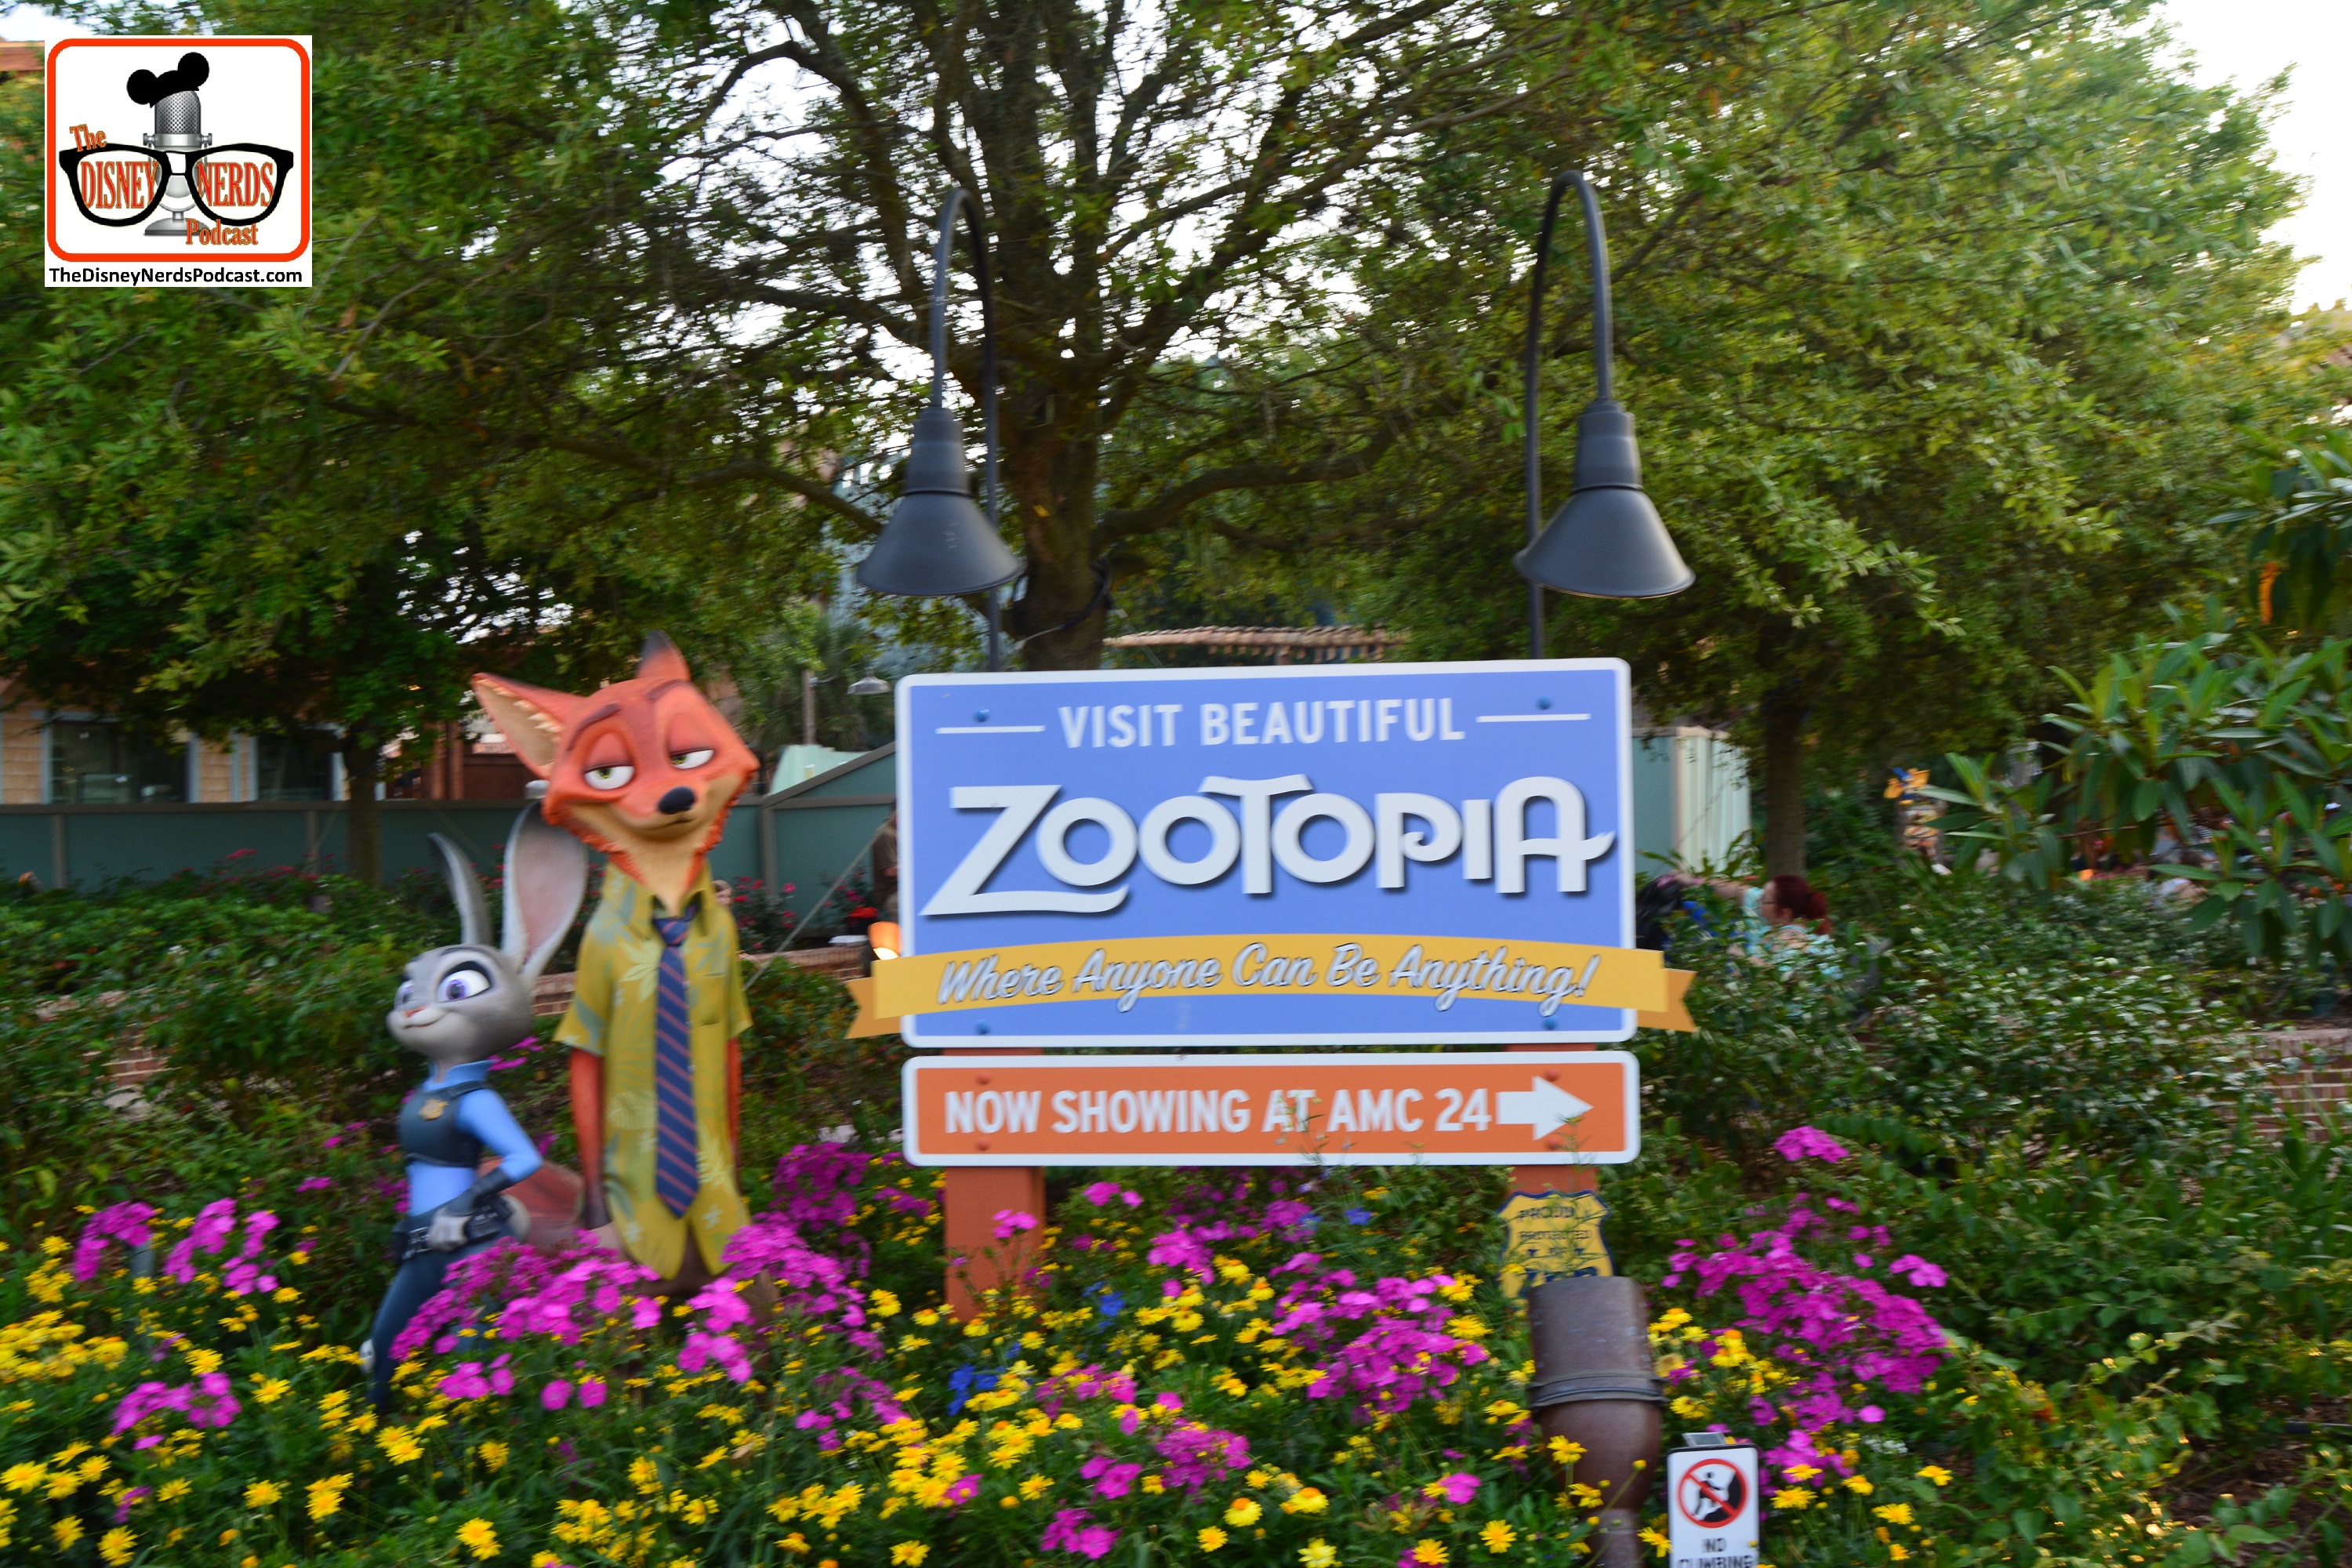 DNP April 2016 Photo Report: Disney Springs: Zootopia, now showing at AMC 24